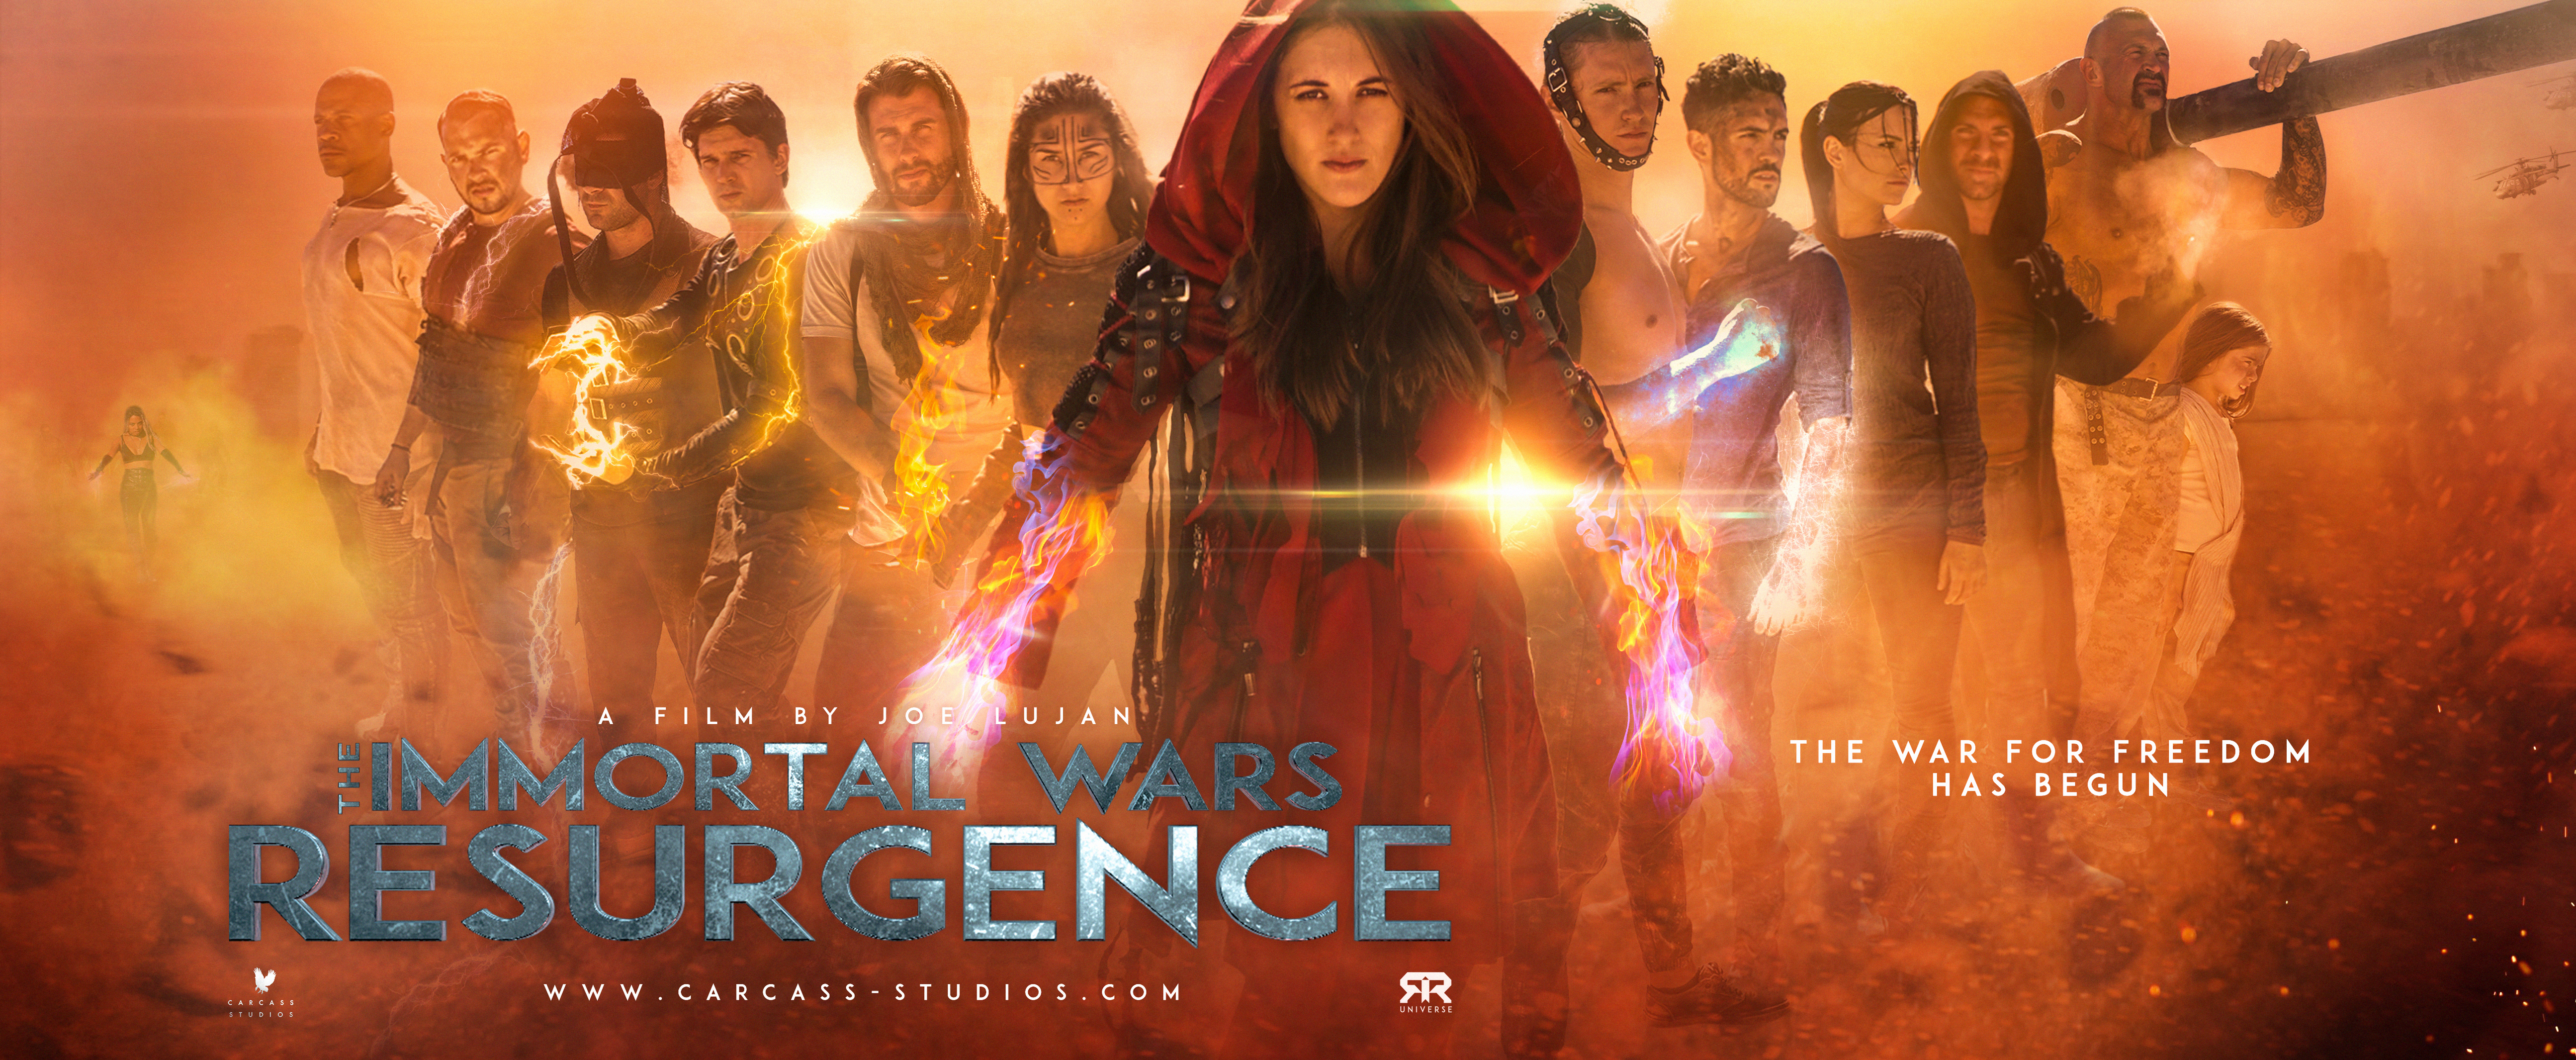 Rose Donahue In The Immortal Wars Resurgence Wallpapers